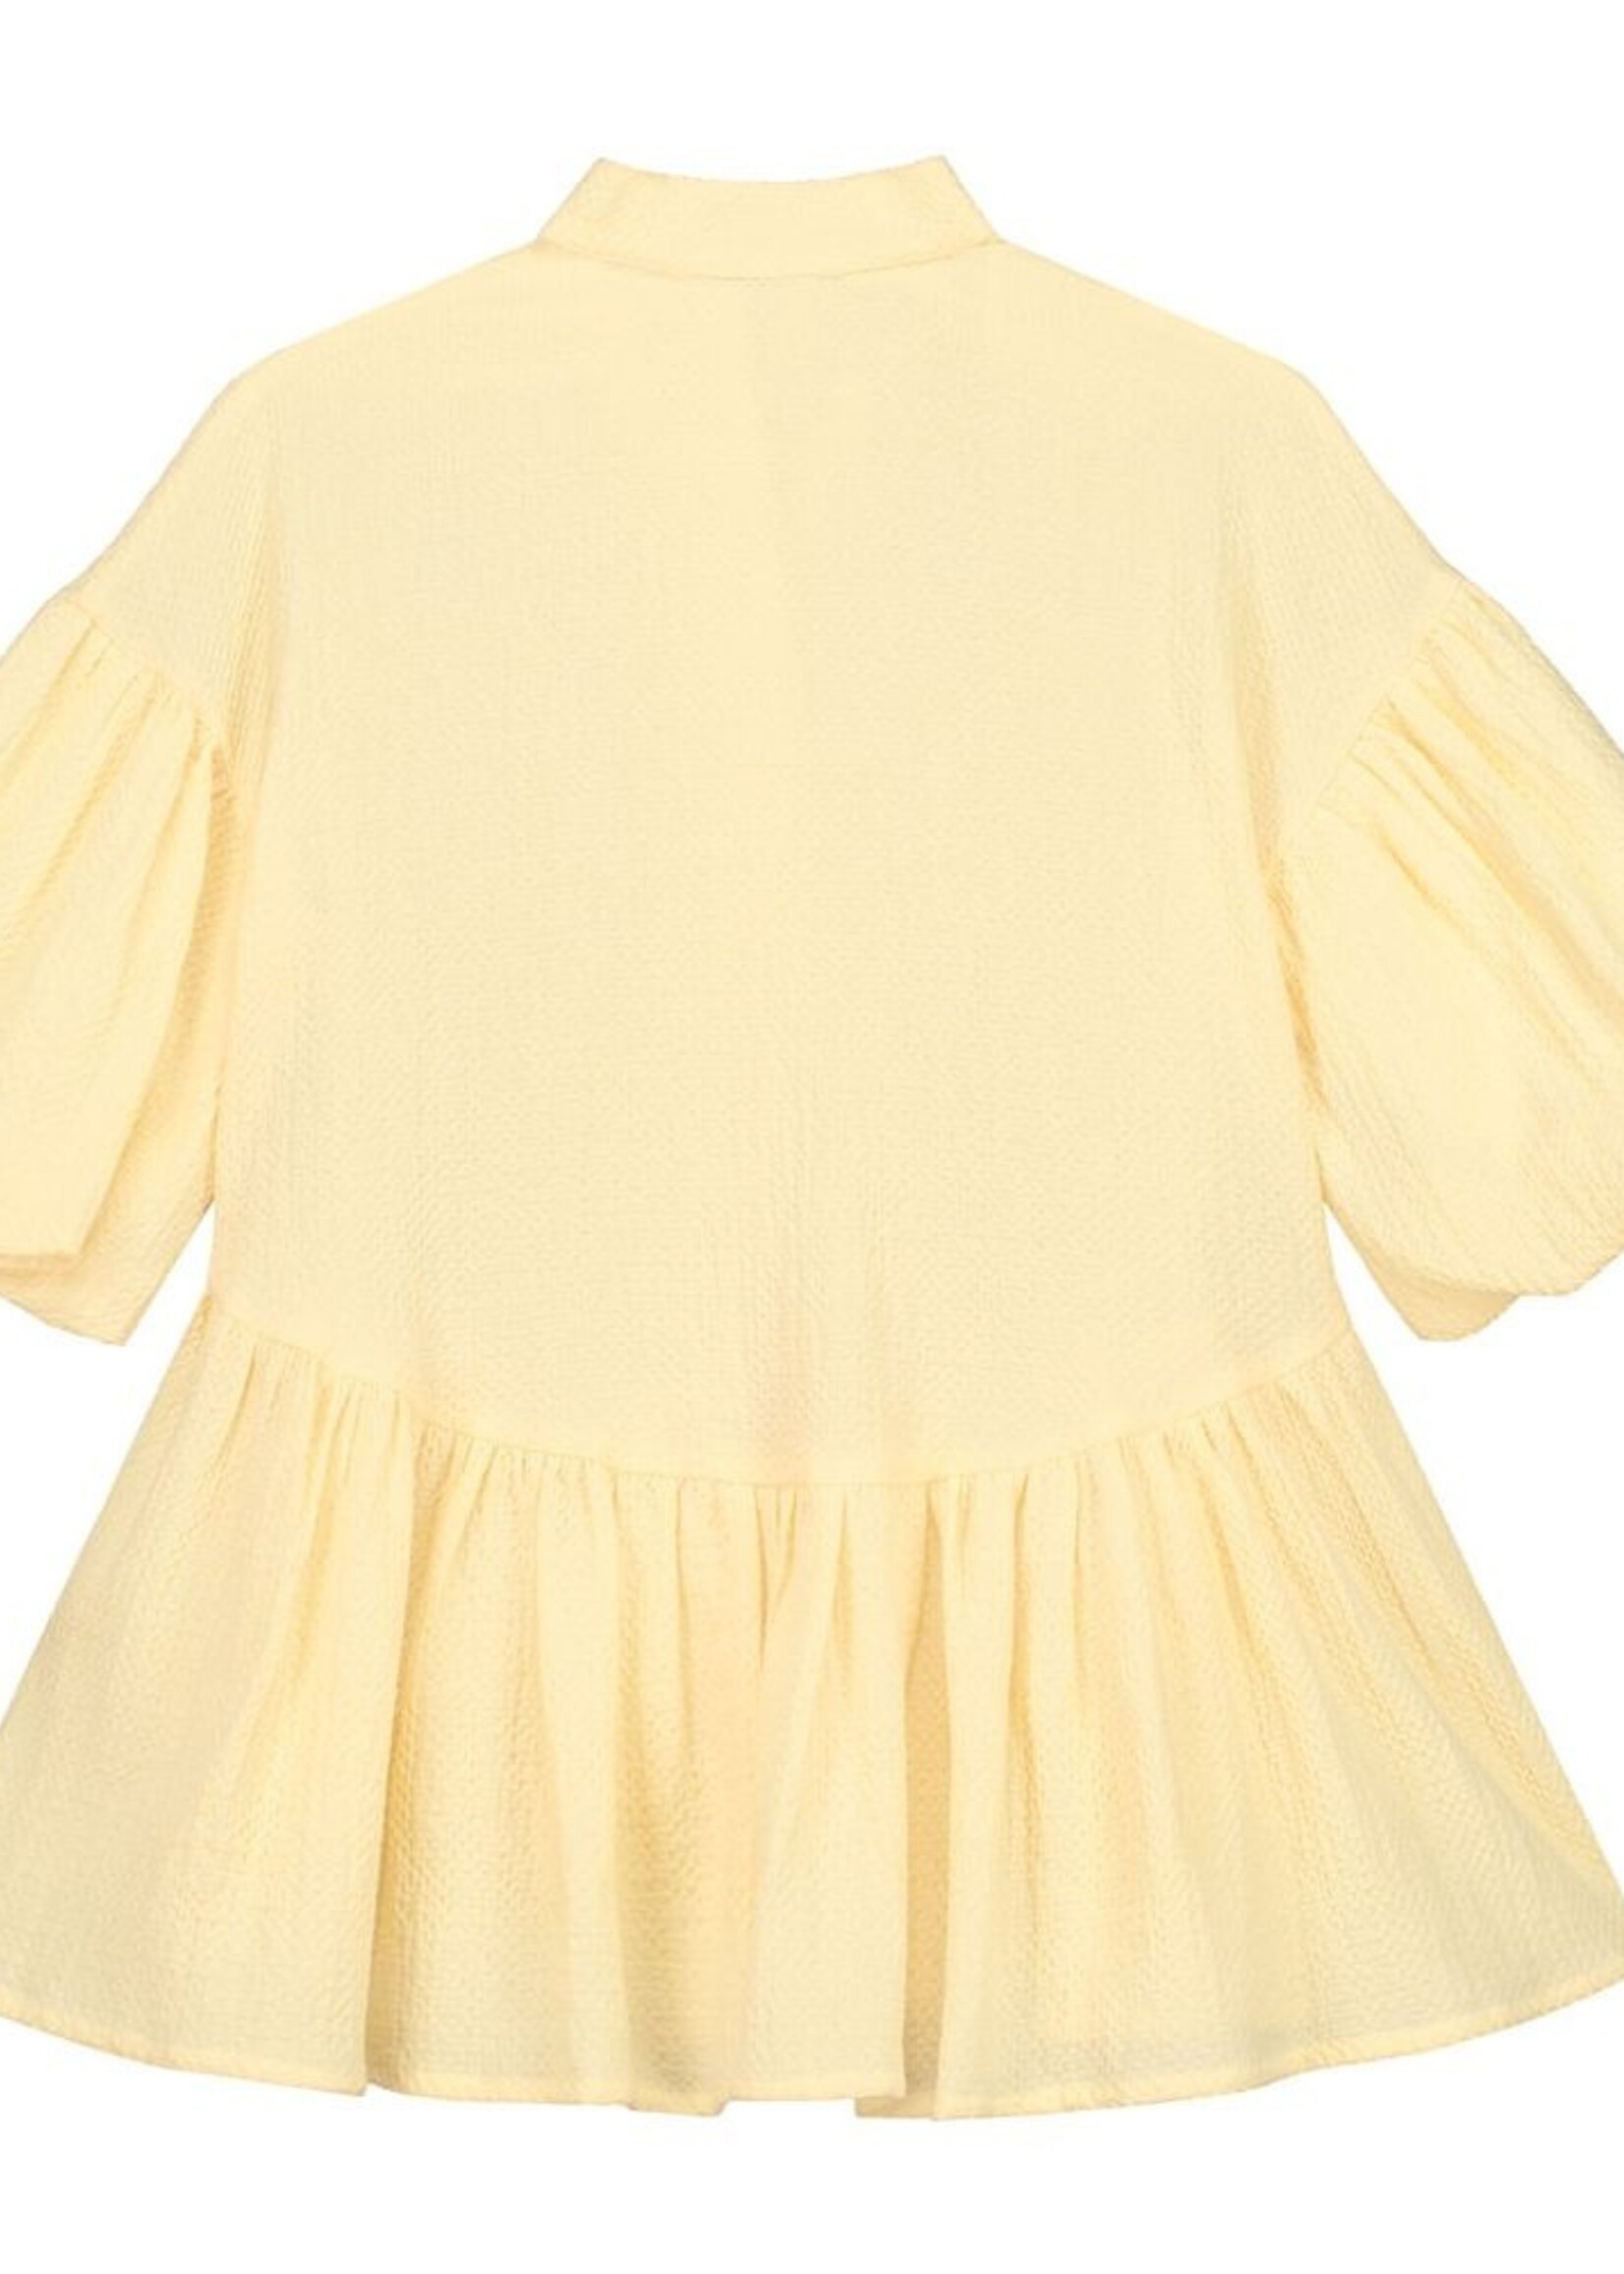 Charlie Petite Isabelle dress Yellow - Charlie Petite